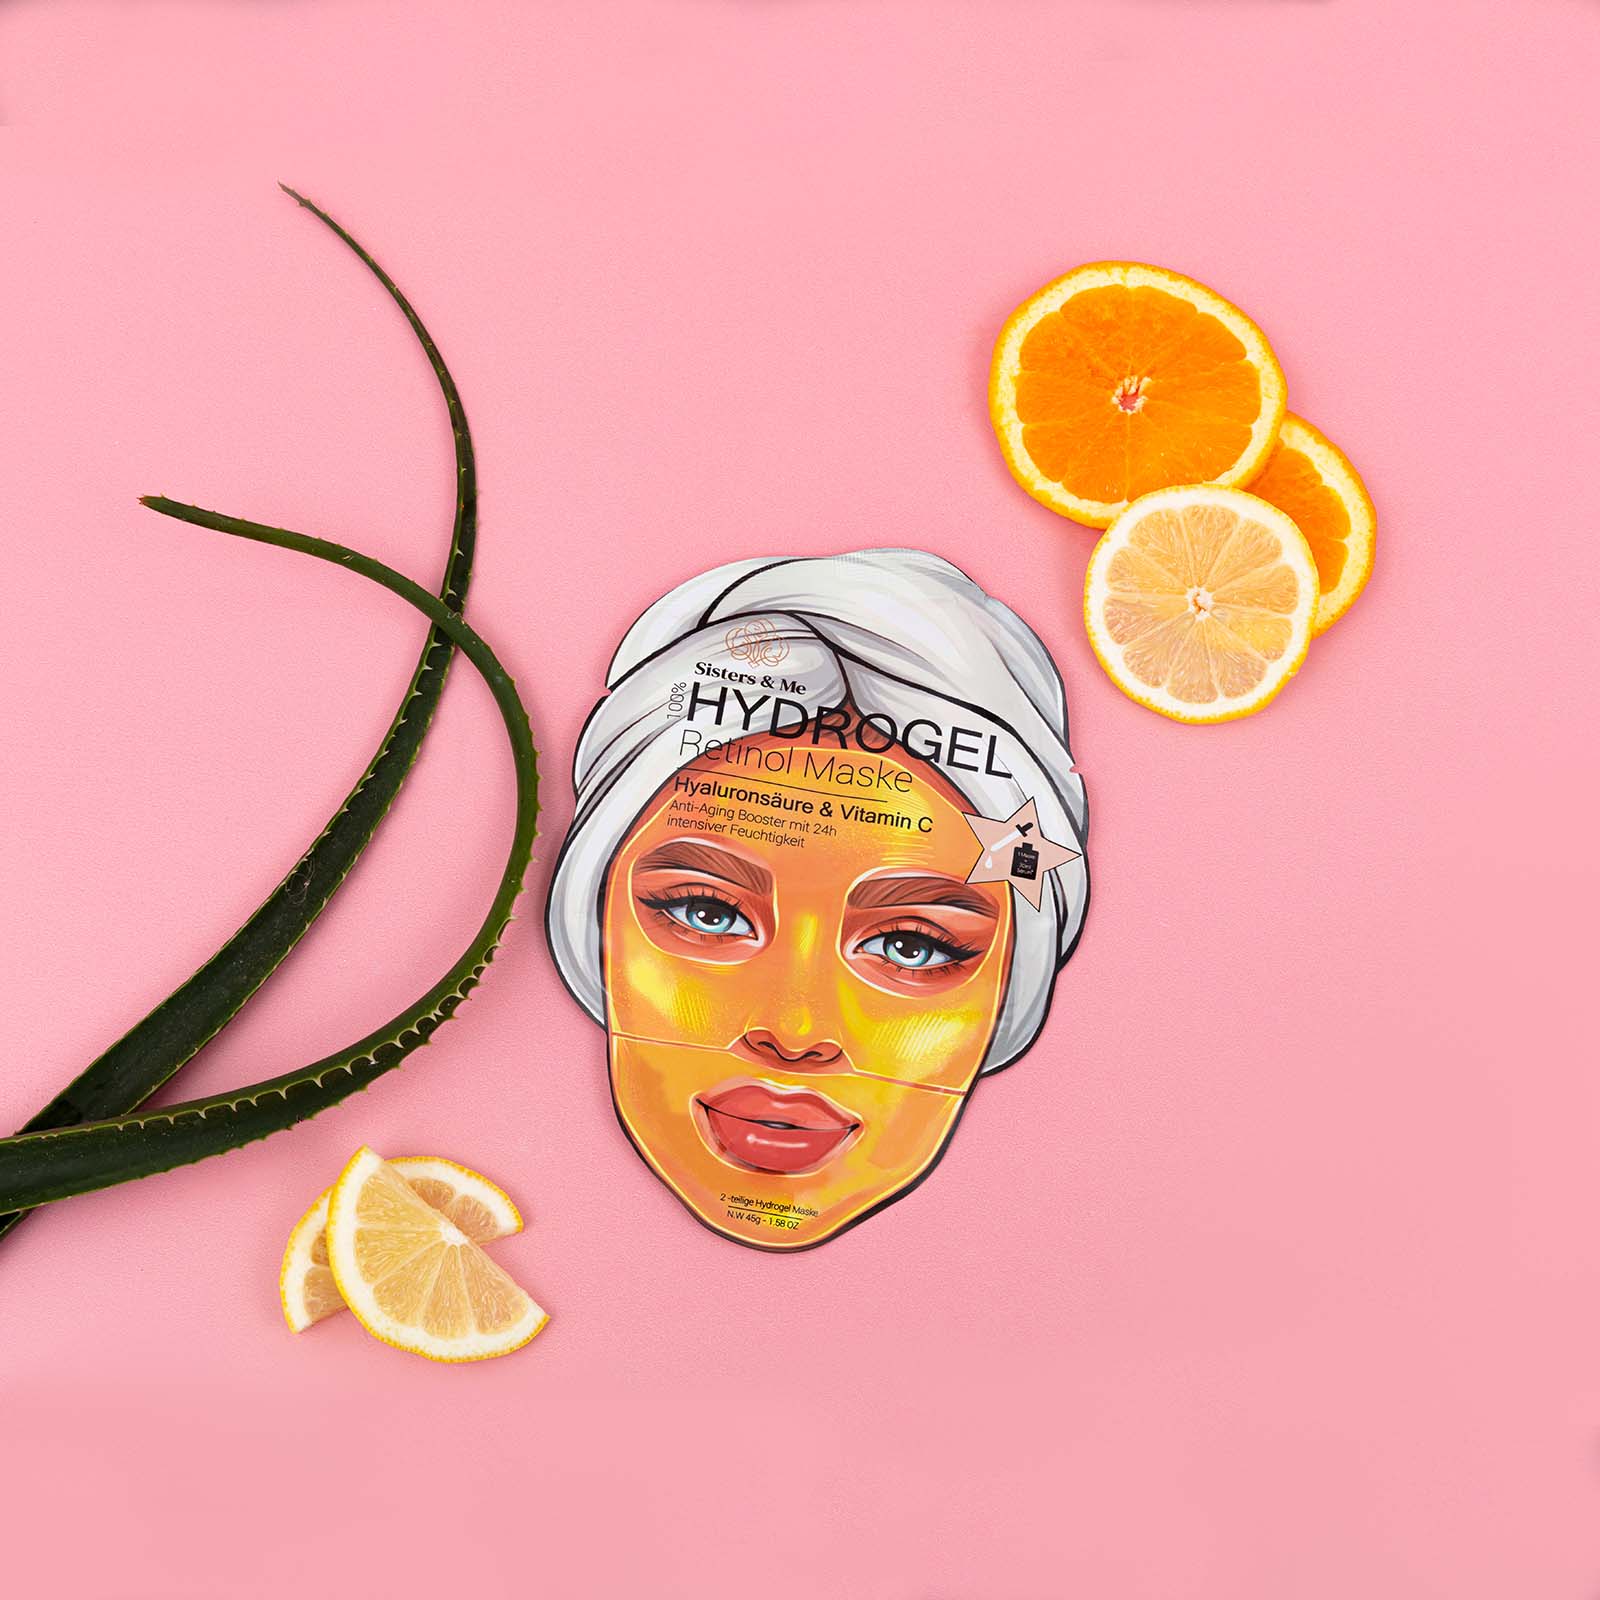 cute pink product photos for face mask brand sisters and me. Styled product stills by colourpop studio